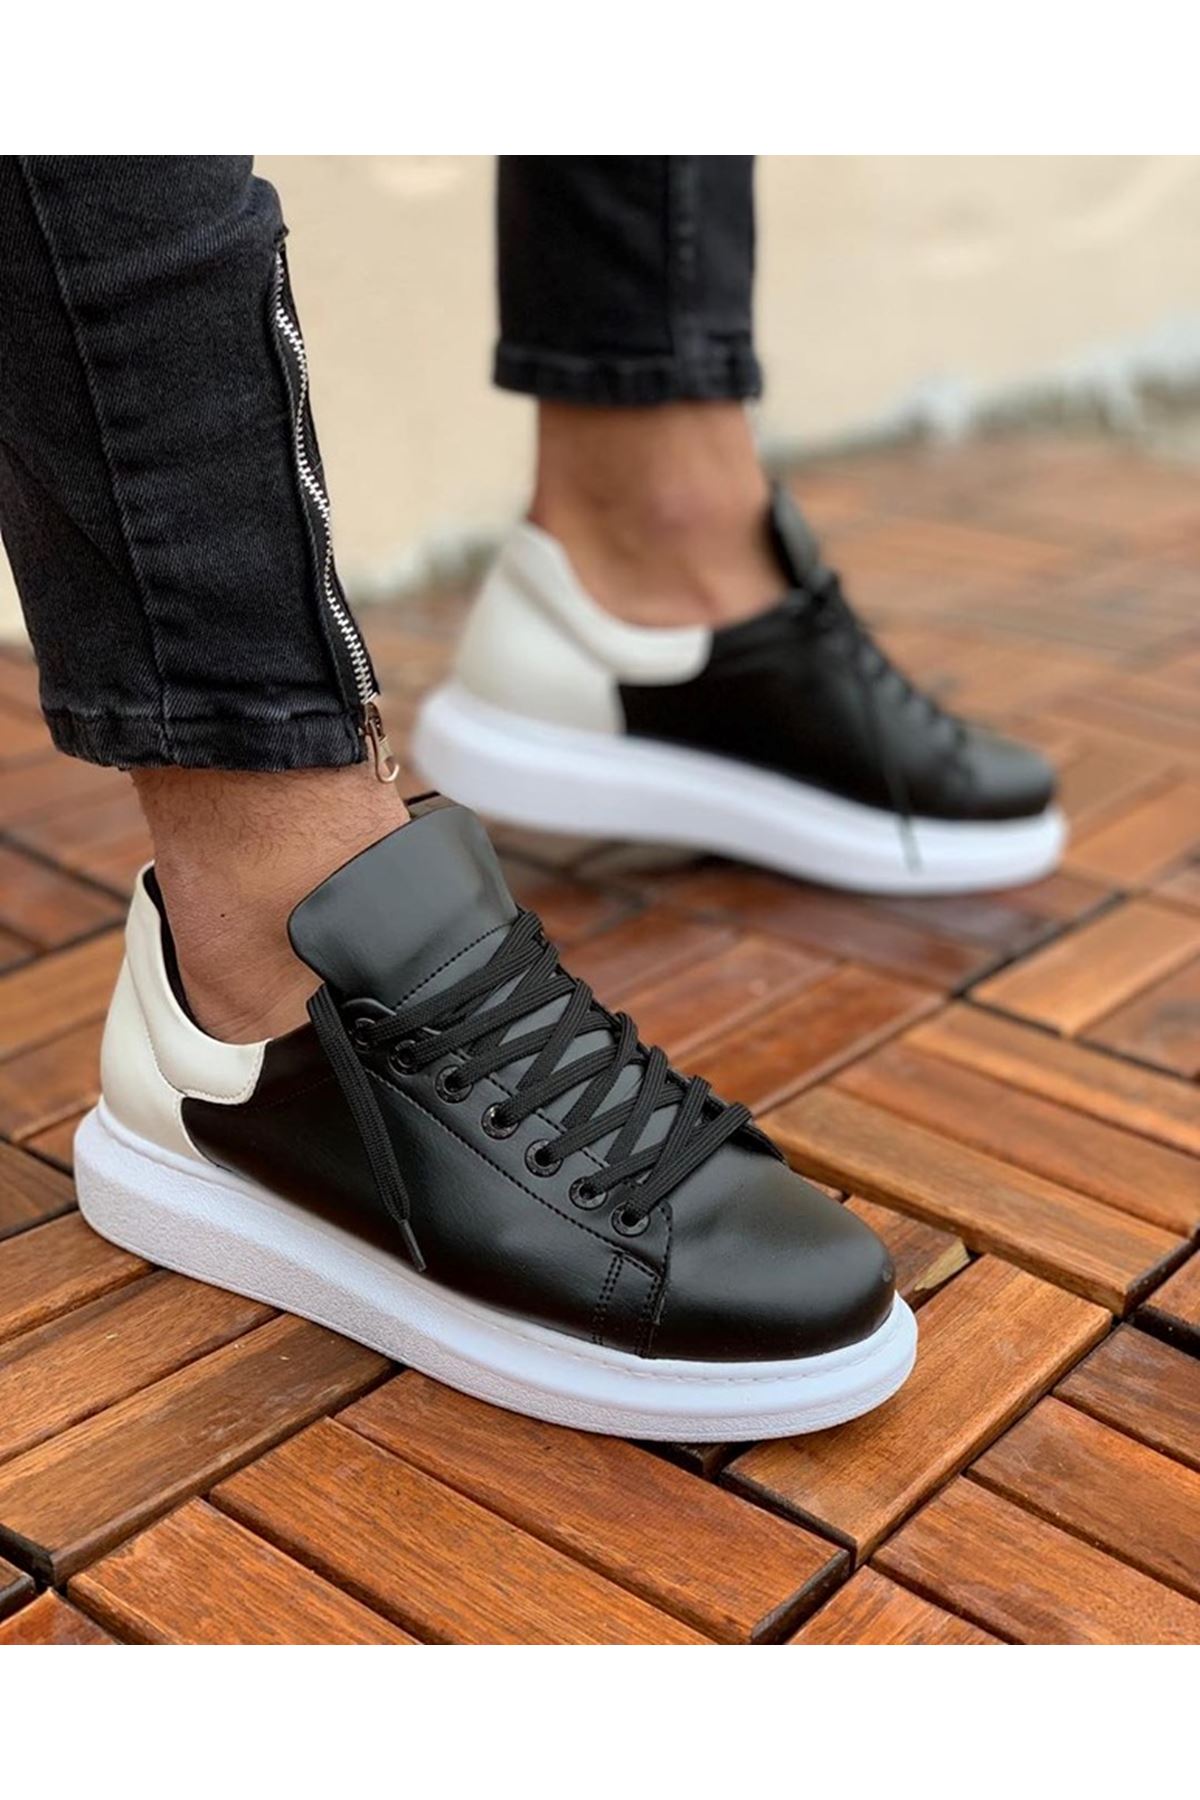 Chekich Men's & Women's Shoes Black and White Non Leather Lace Up Mixed Colors Casual Unisex Sneakers Comfortable Spring Fall Orthopedic Odorless Sport Lightweight Breathable Ladies Gentlemen Sewing Sole Suits CH256 V1